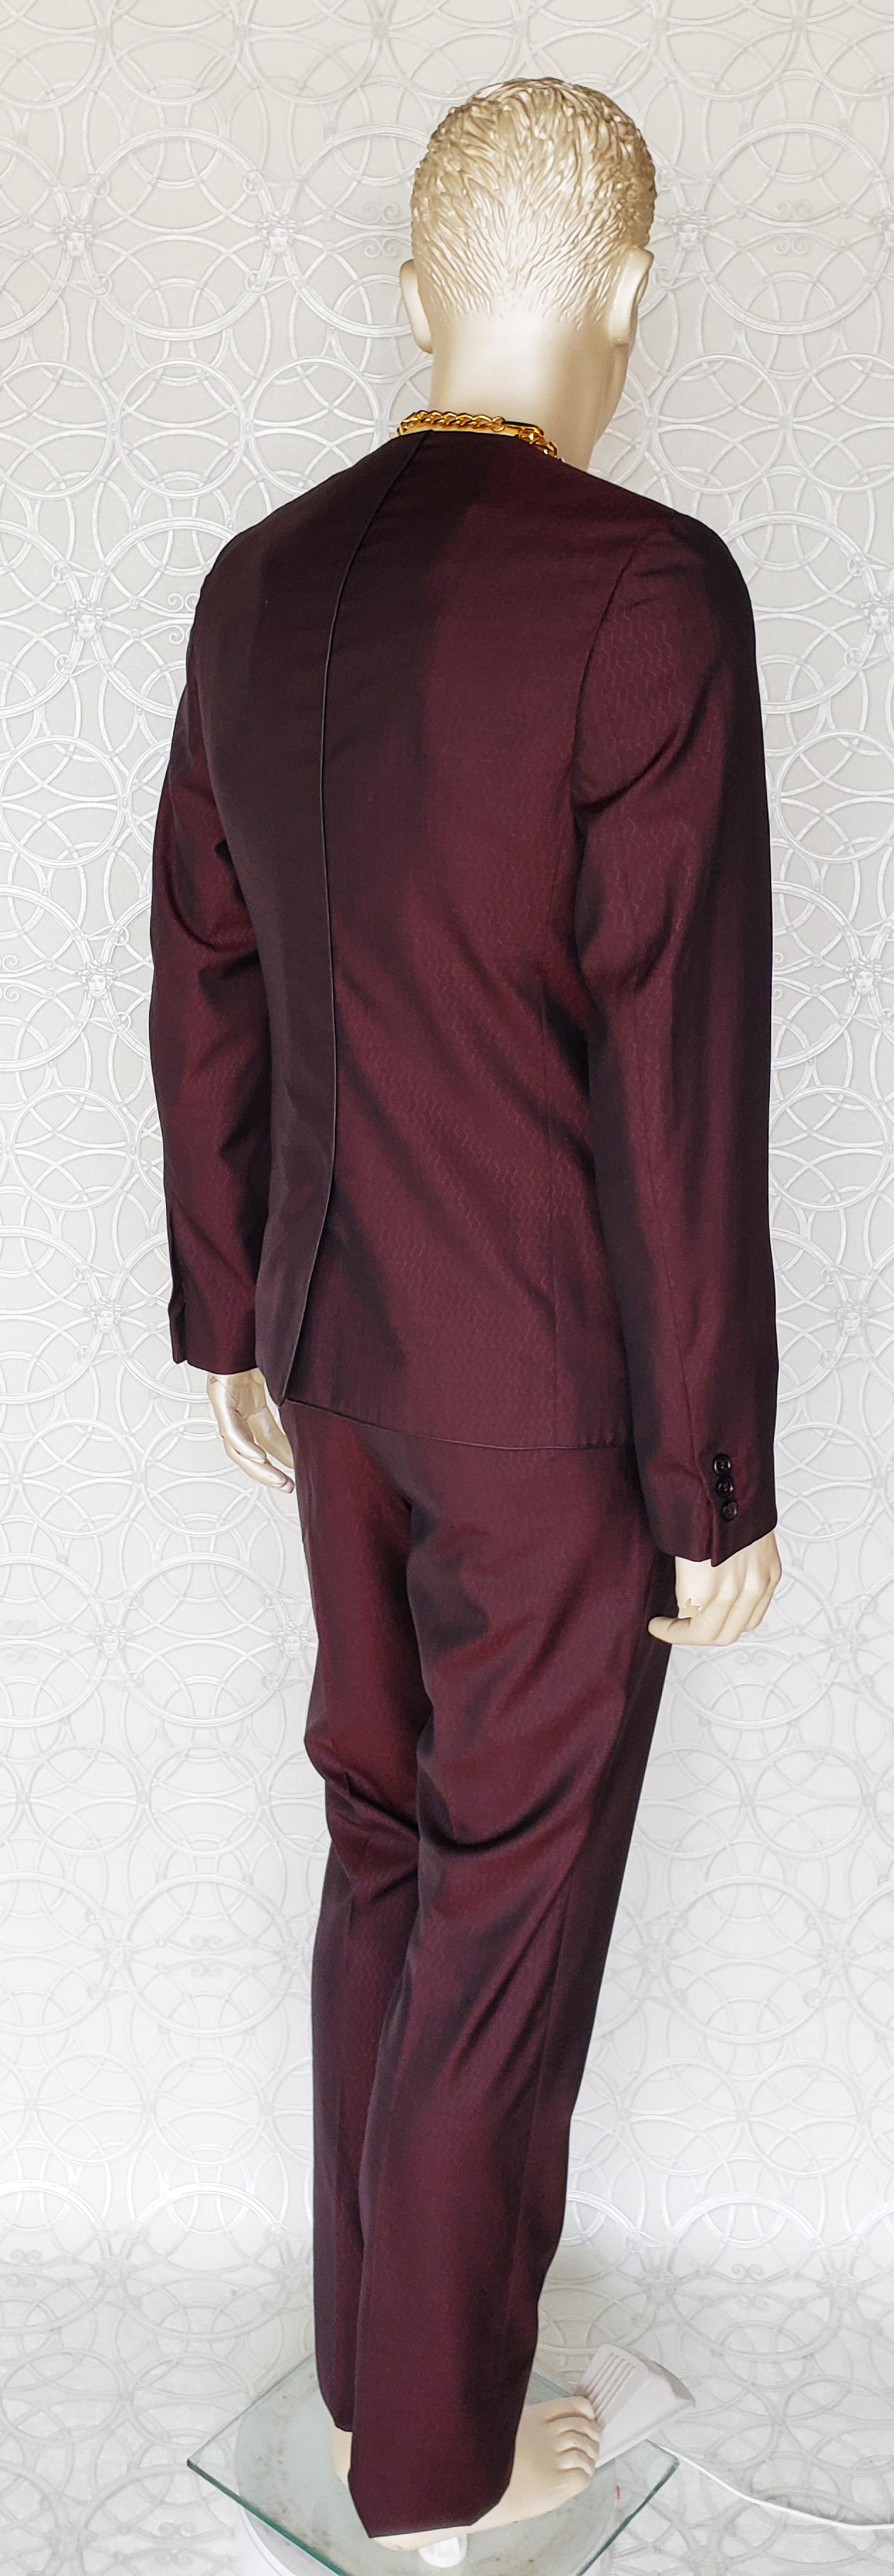 Men's S/S 2011 look #19 NEW VERSACE BURGUNDY WOOL and SILK SUIT 48 - 38 (M) For Sale